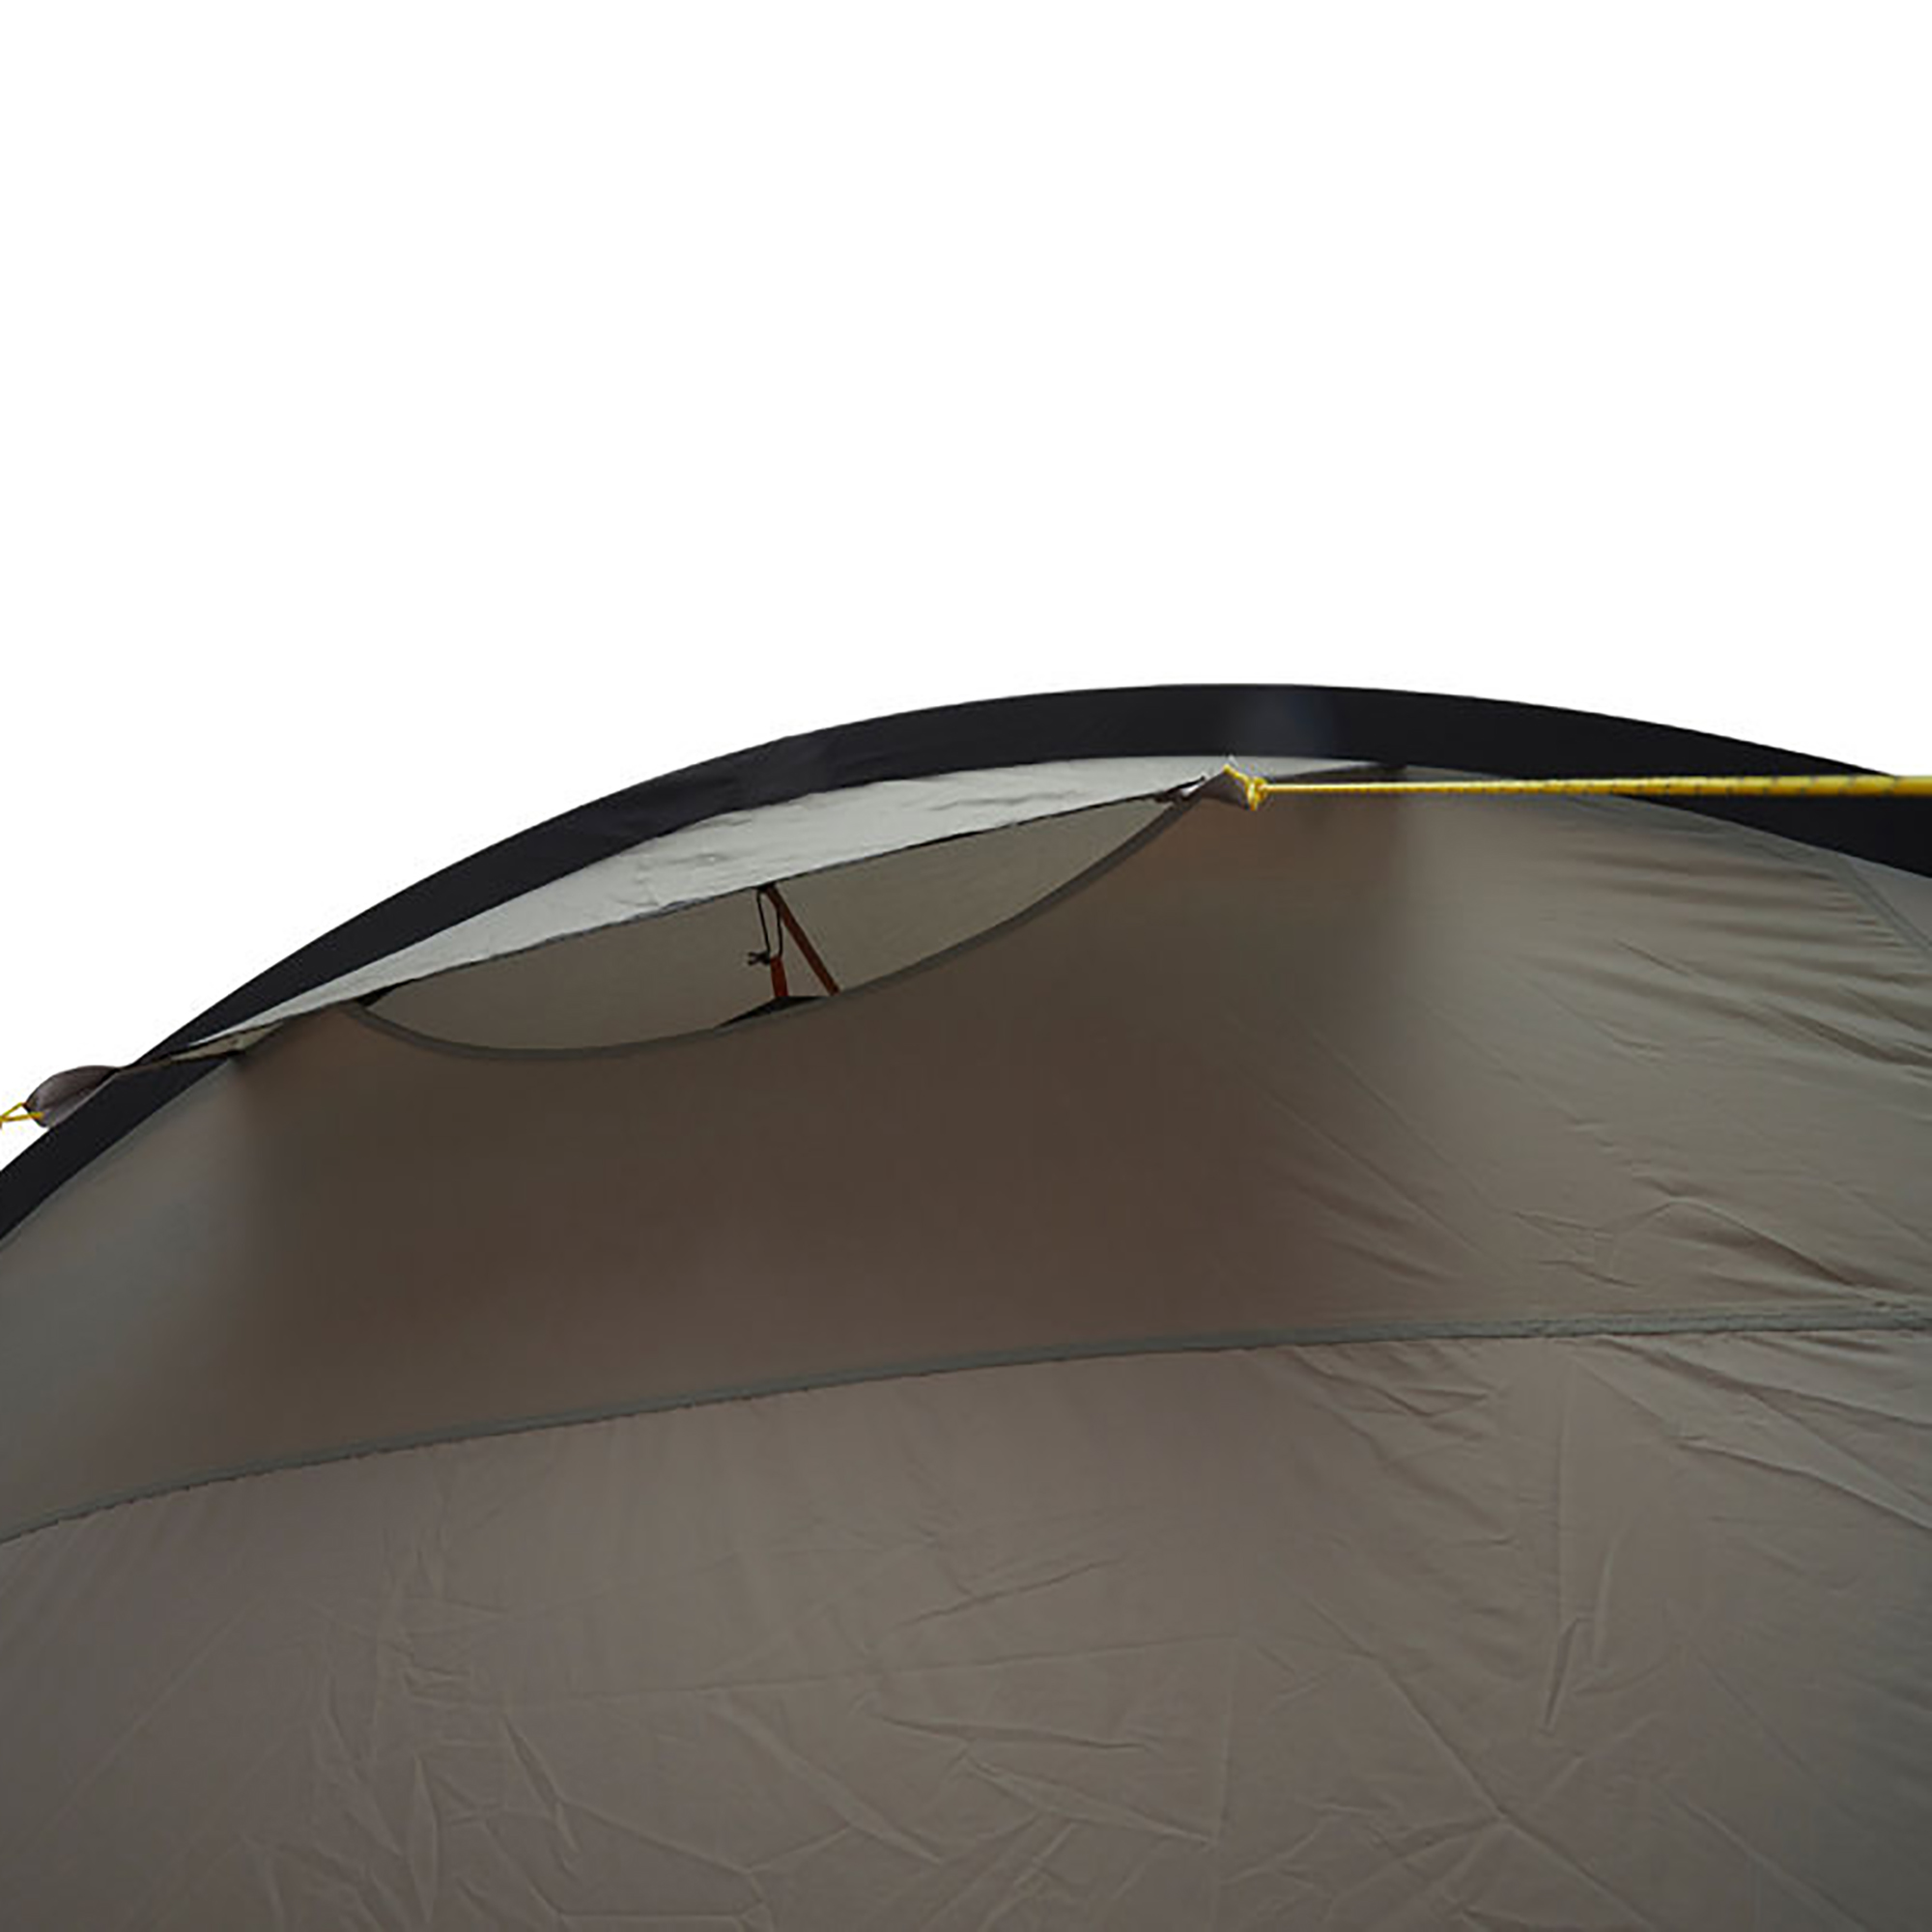 Wechsel Voyager Lightweight 4-Person Camping Tent